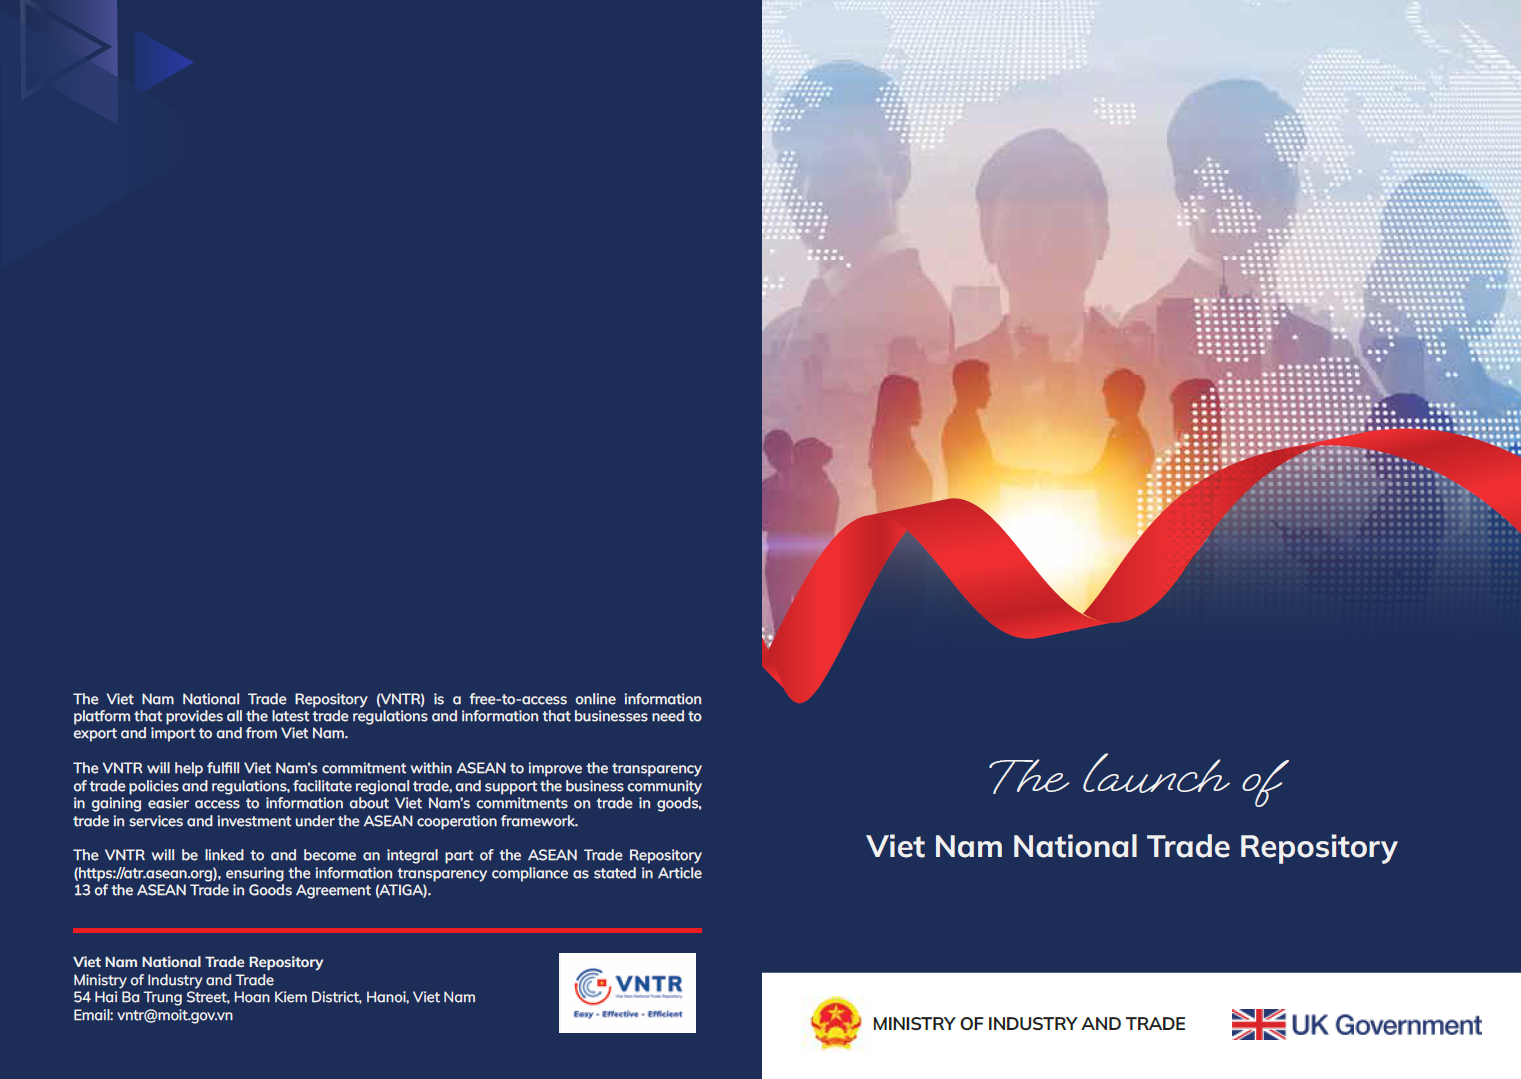 Launching Ceremony of the Viet Nam National Trade Repository (VNTR)